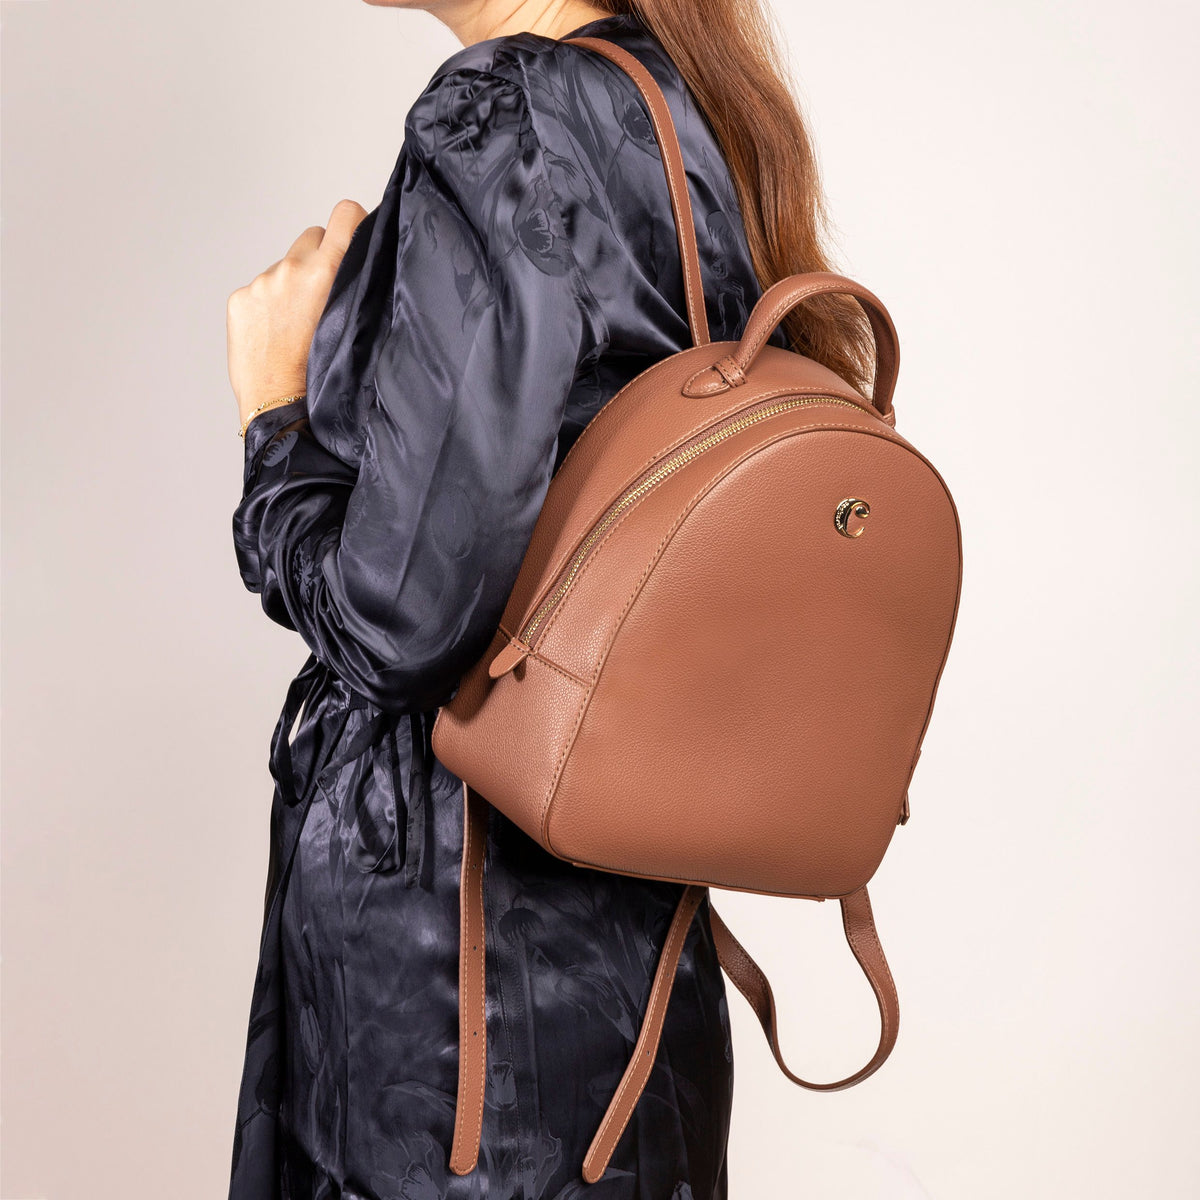 Backpack in camel color Alma from Cacharel business gifts in HK ...